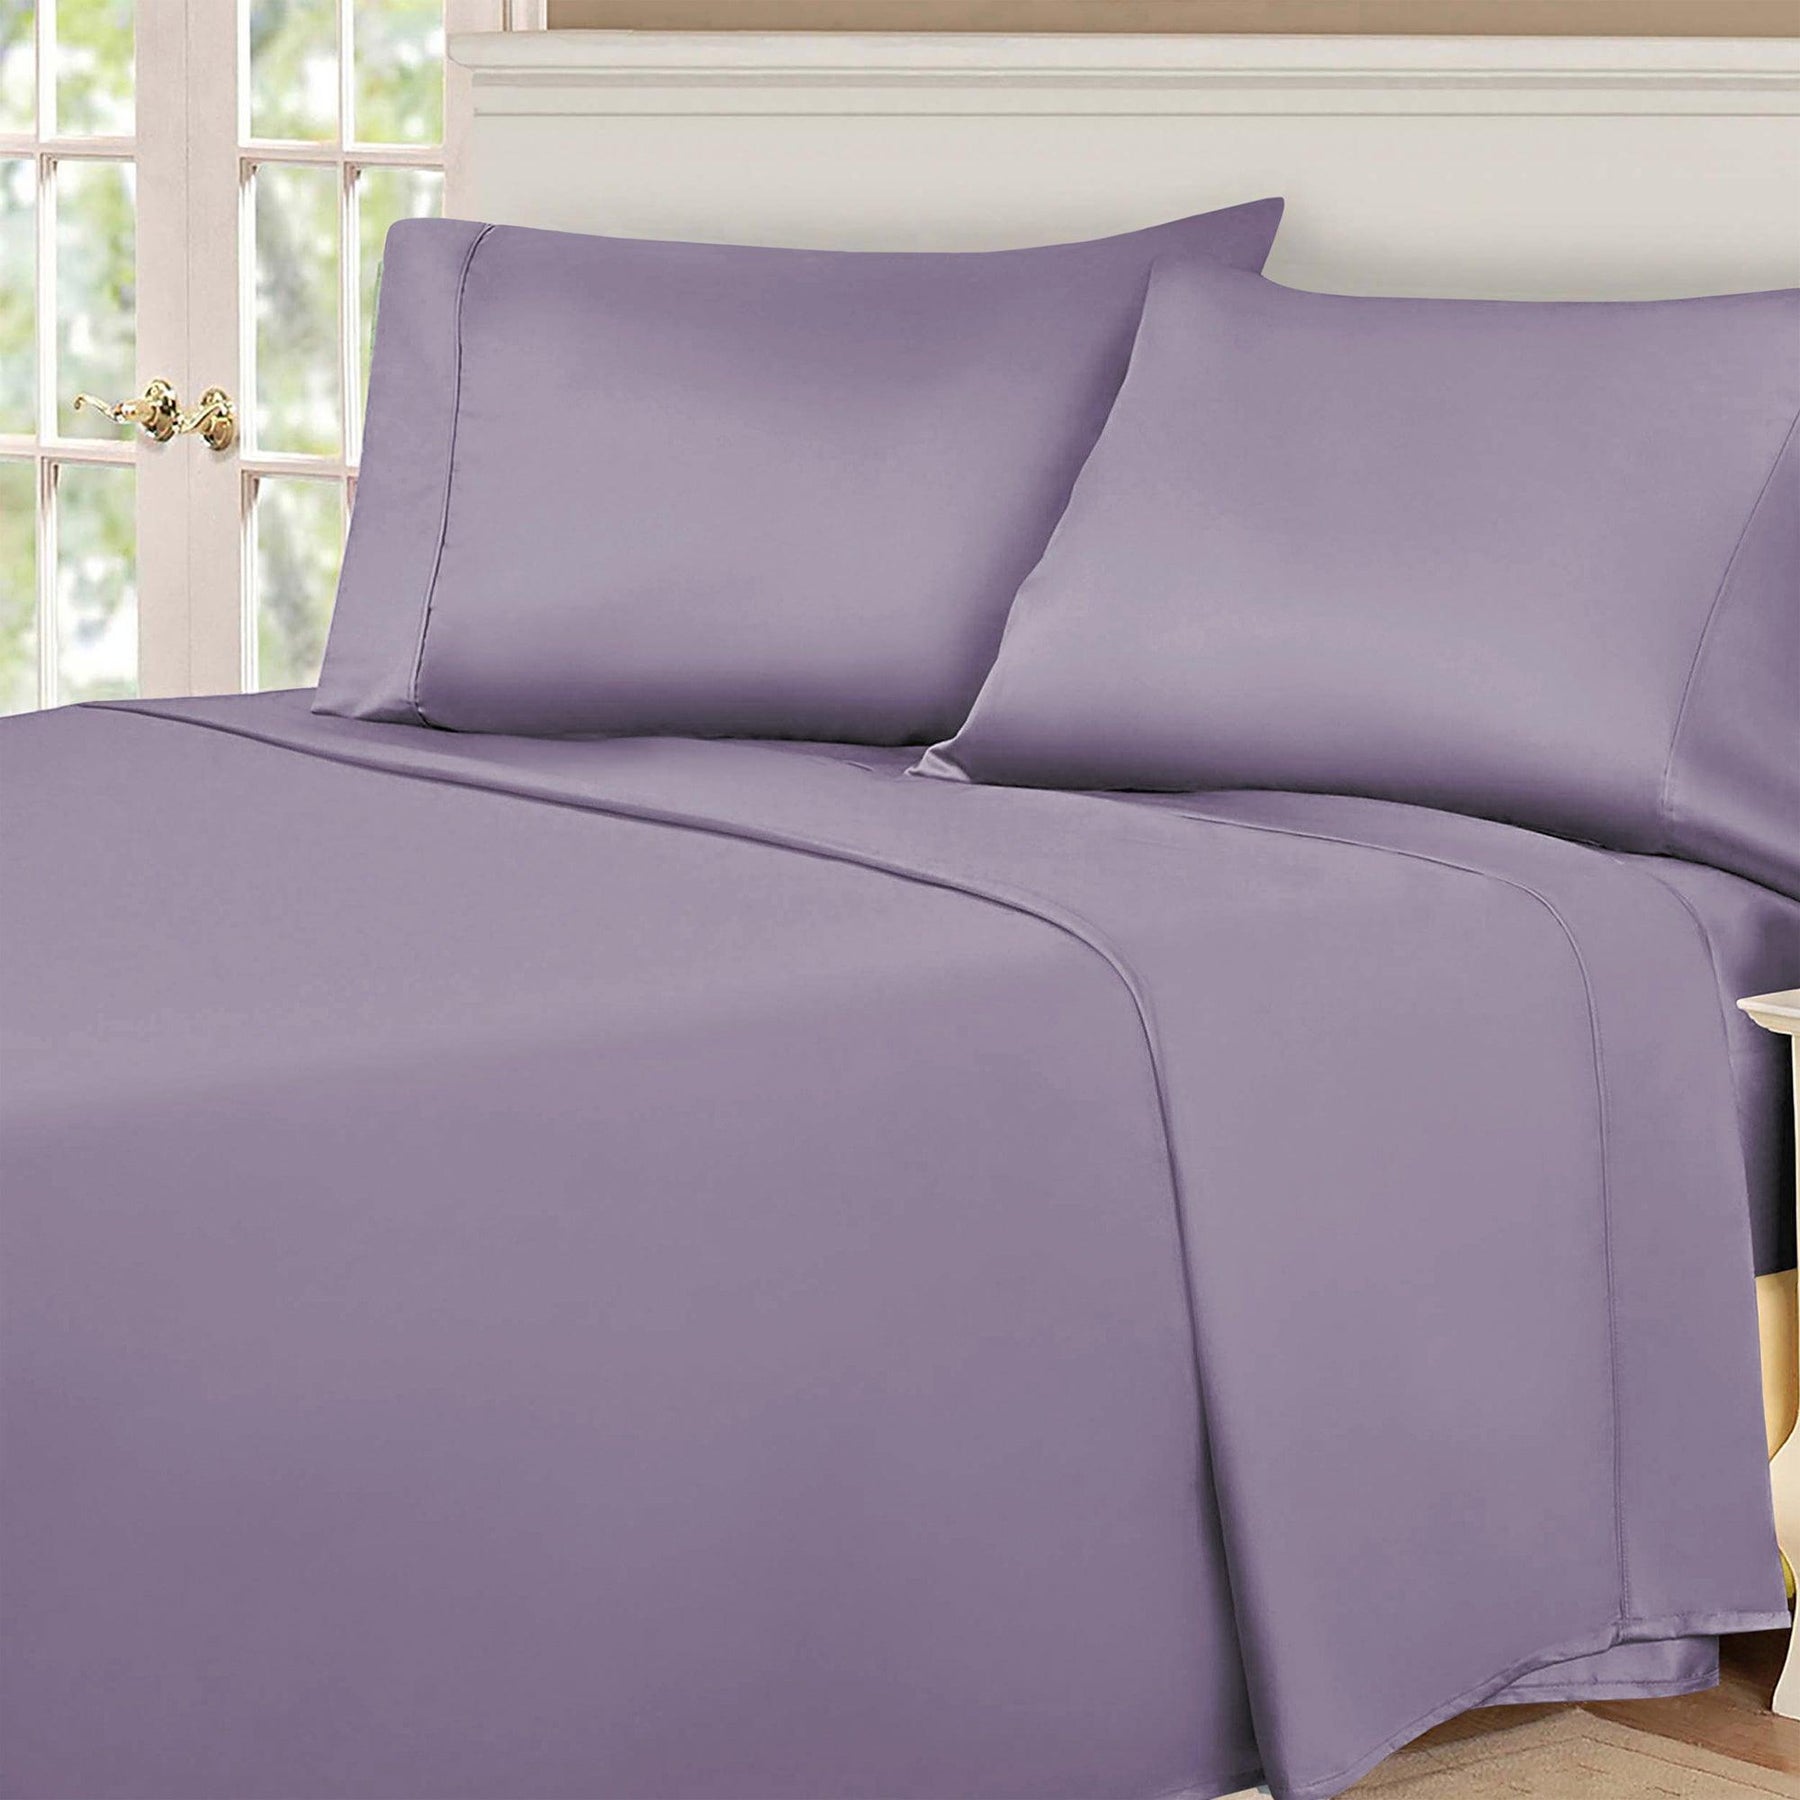  Superior Egyptian Cotton 530 Thread Count Solid Sheet Set - Lavender